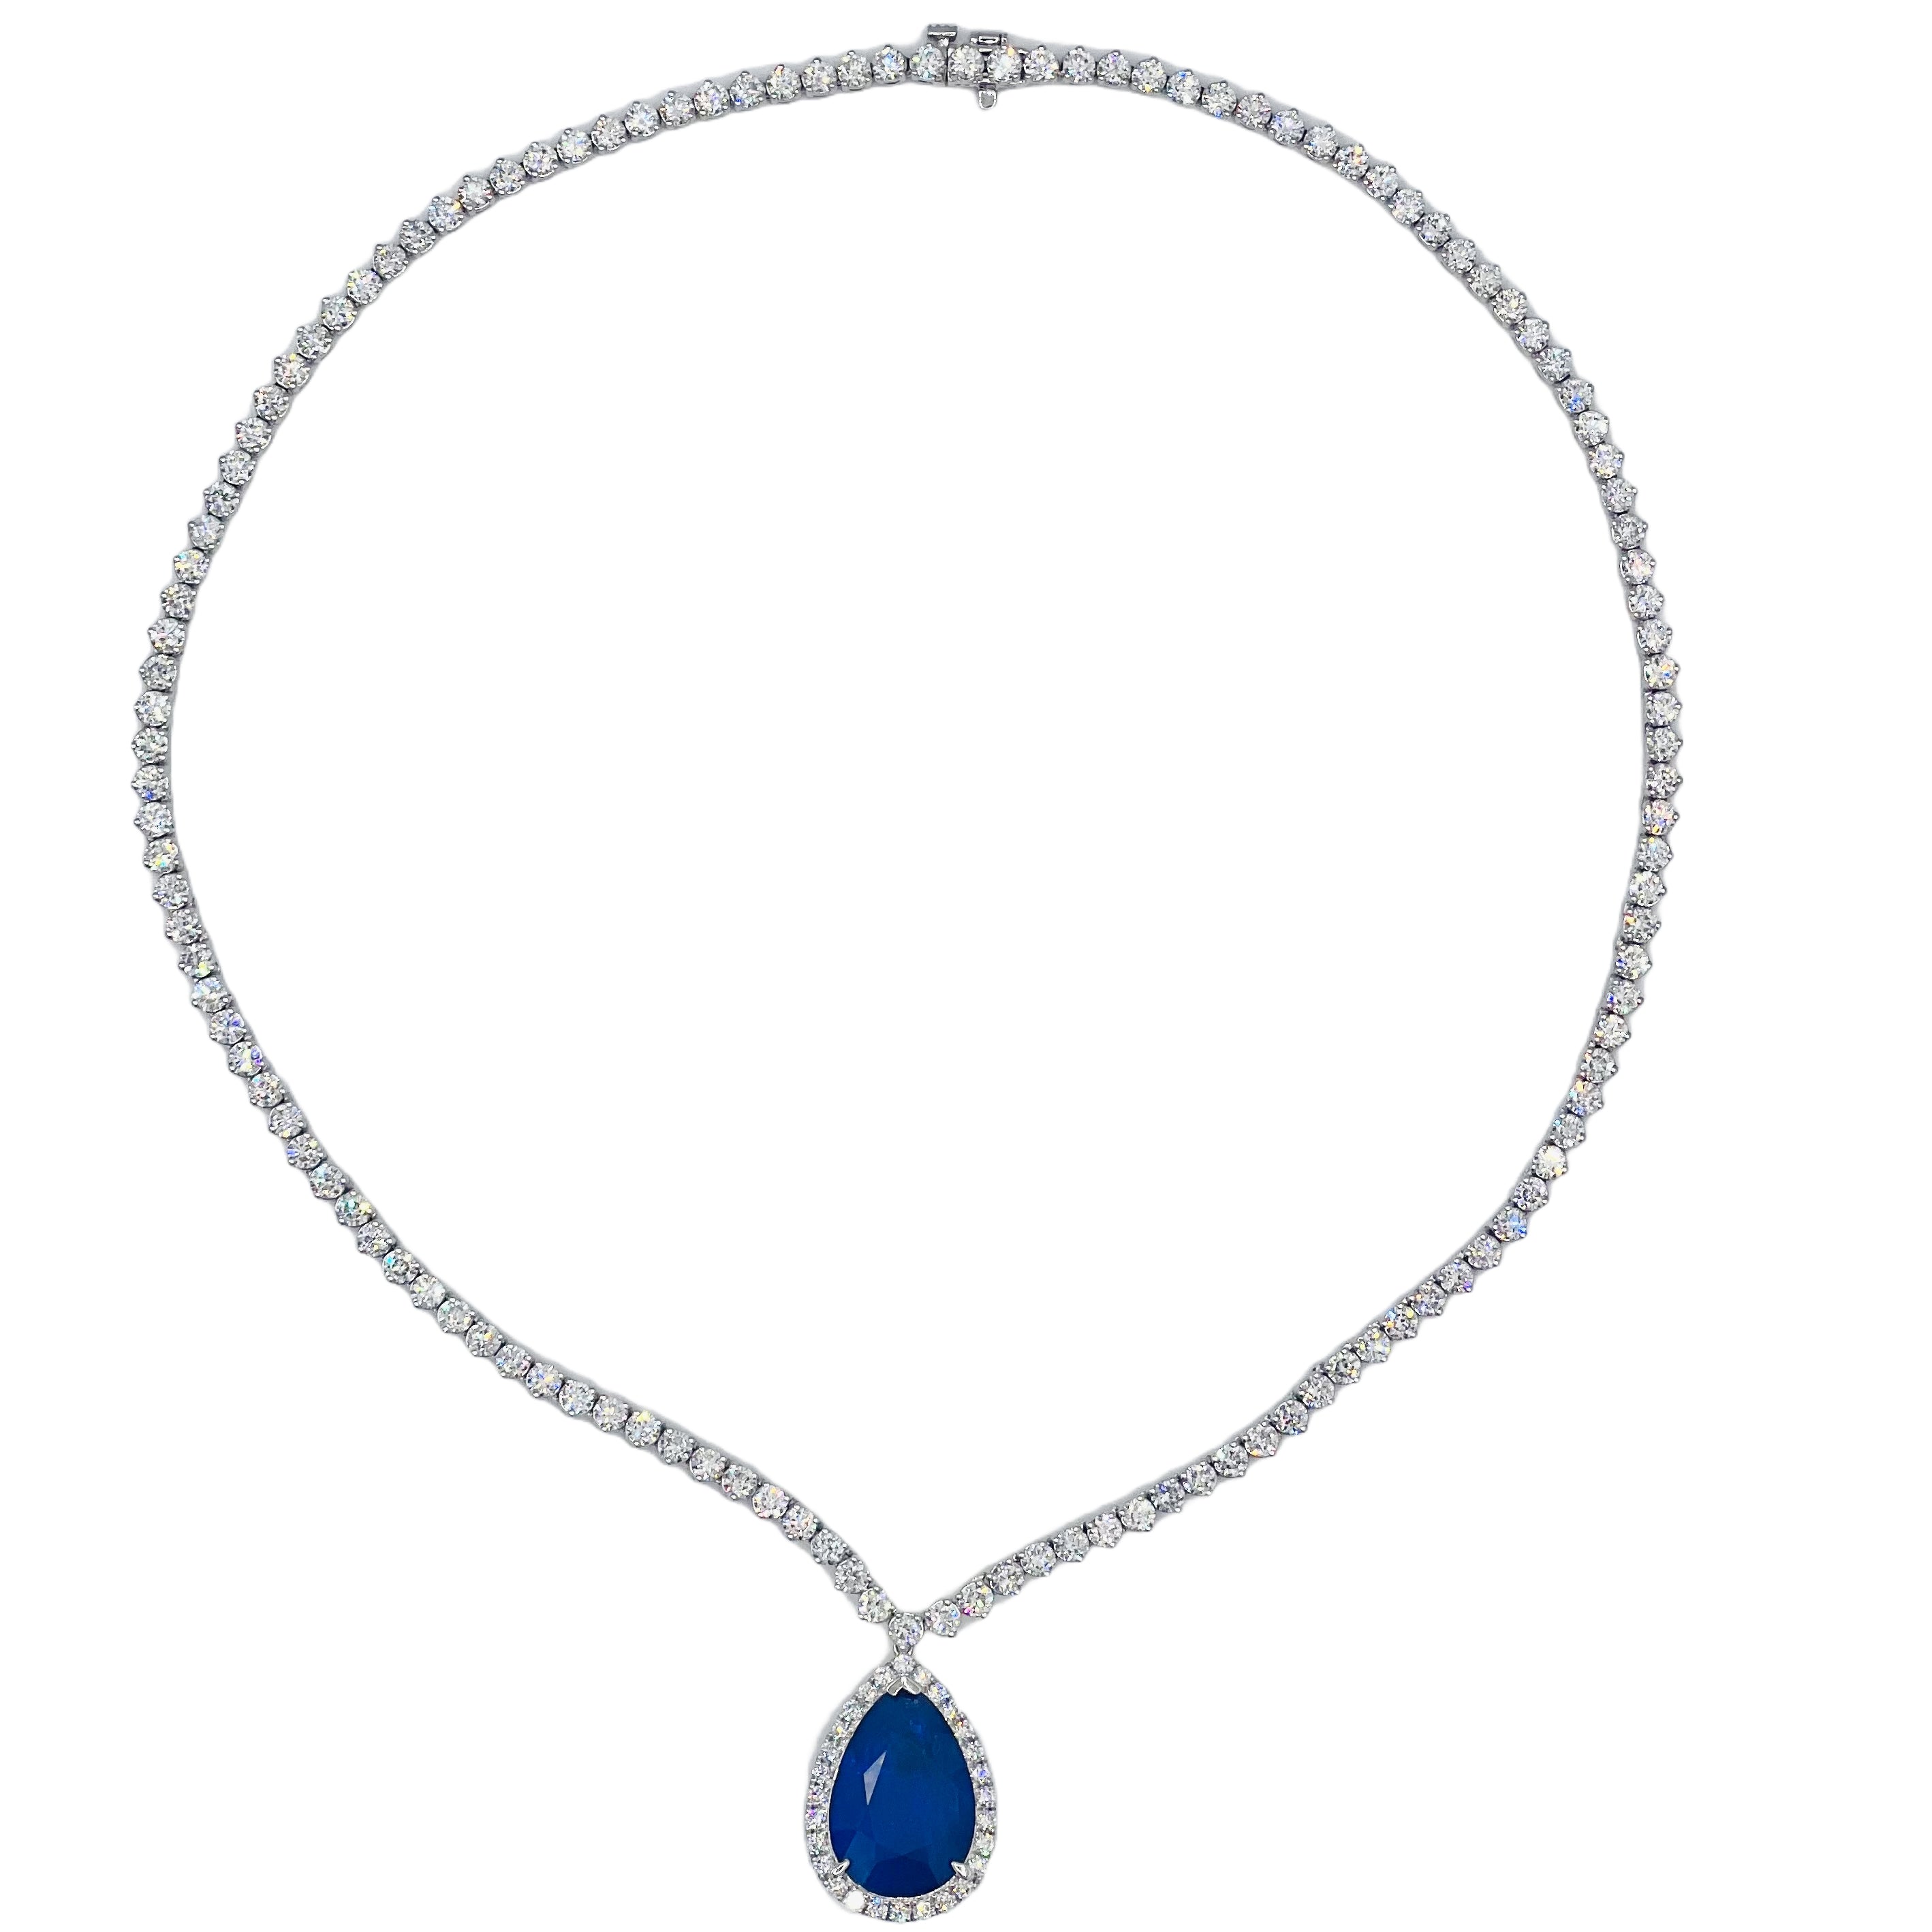 Necklace 18KW 1SAPP-17.546CT 28RD-0.79CT 129RD-11.6CT